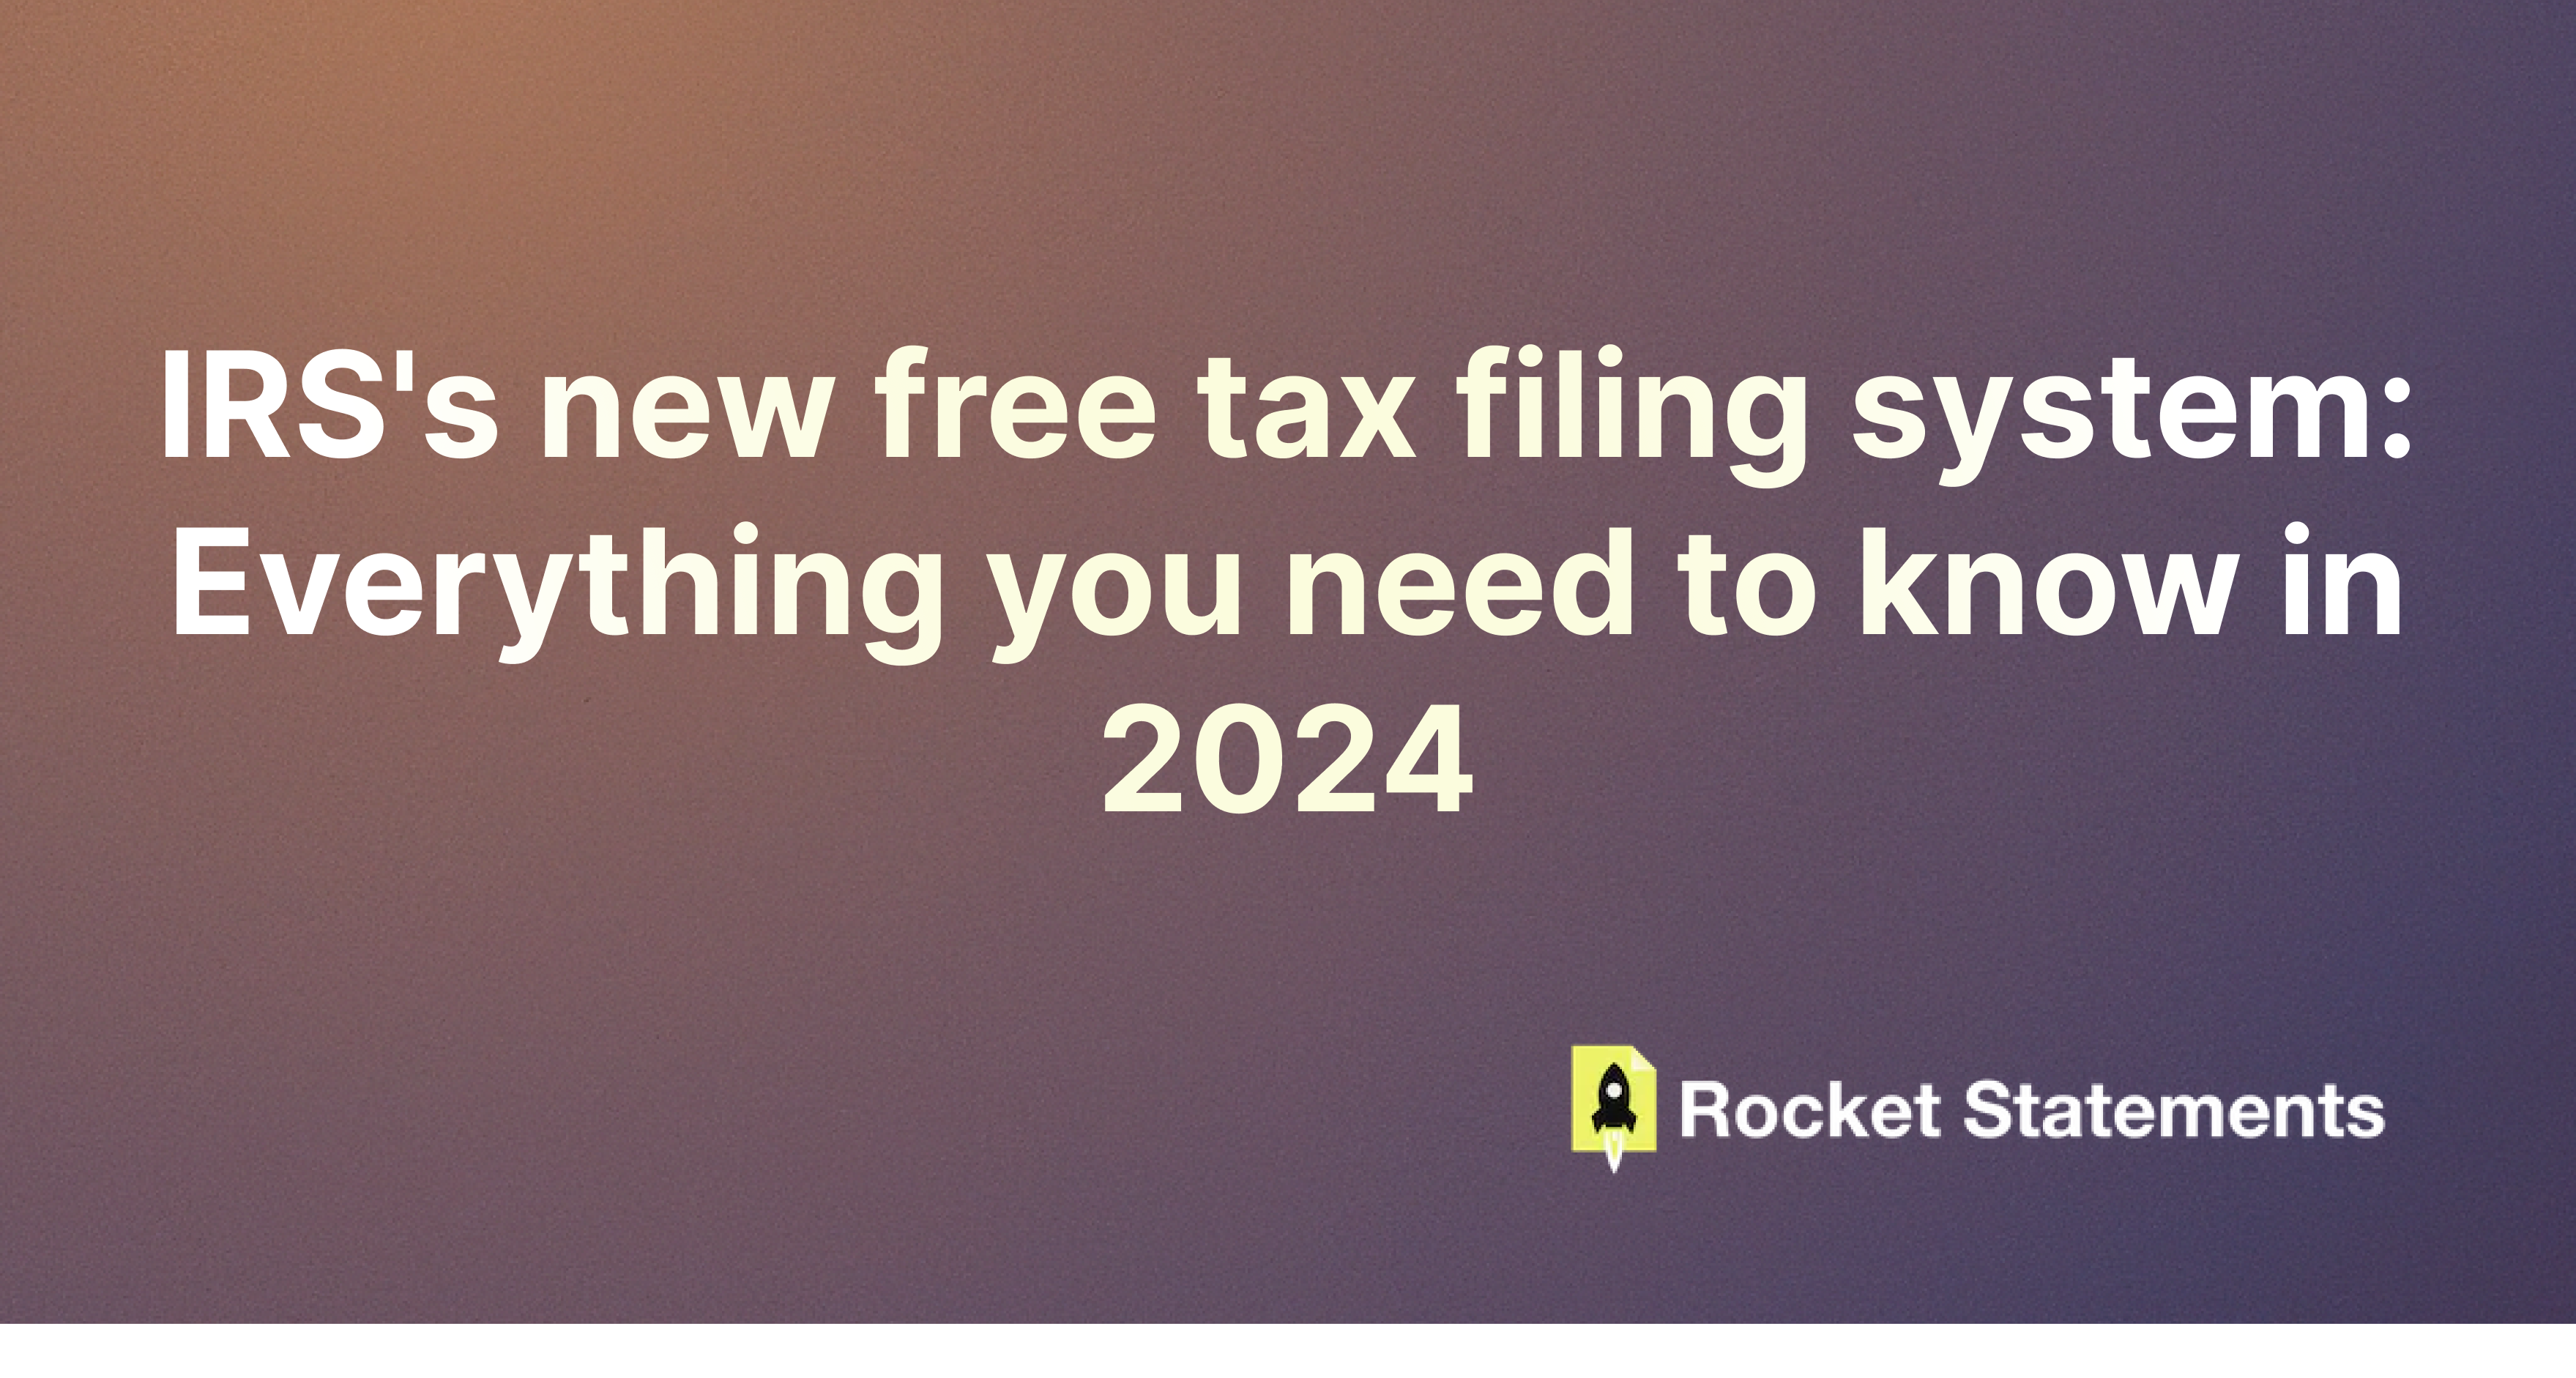 IRS's new free tax filing system: Everything you need to know in 2024